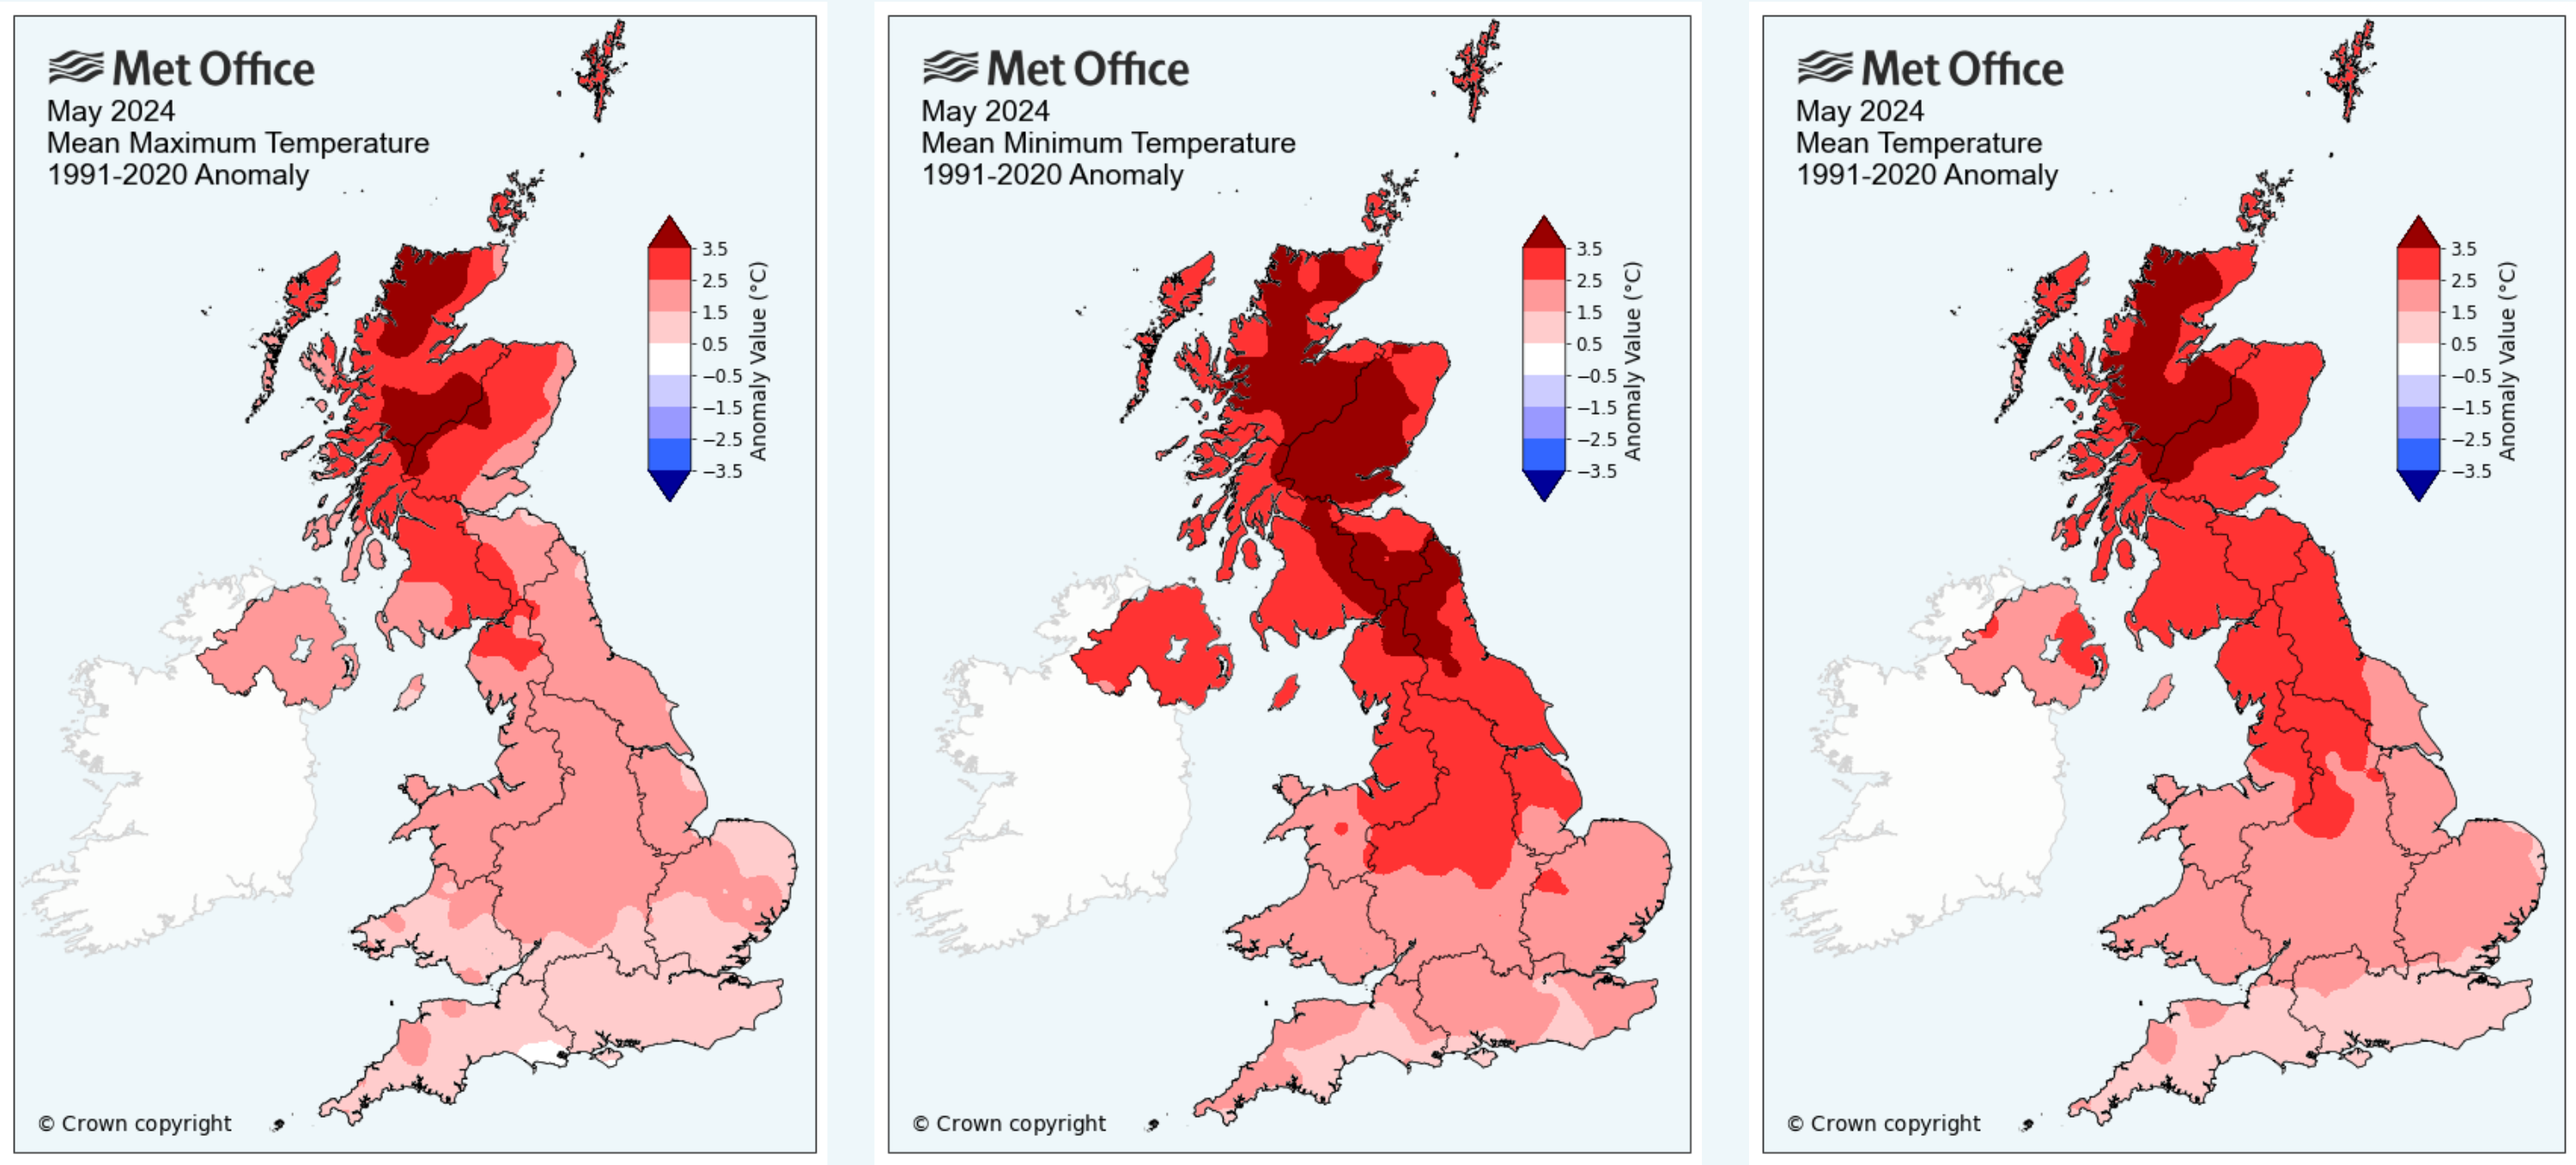 Maps of the UK showing temperatures compared to average in May 2024. The maps show above average temperatures for the month.